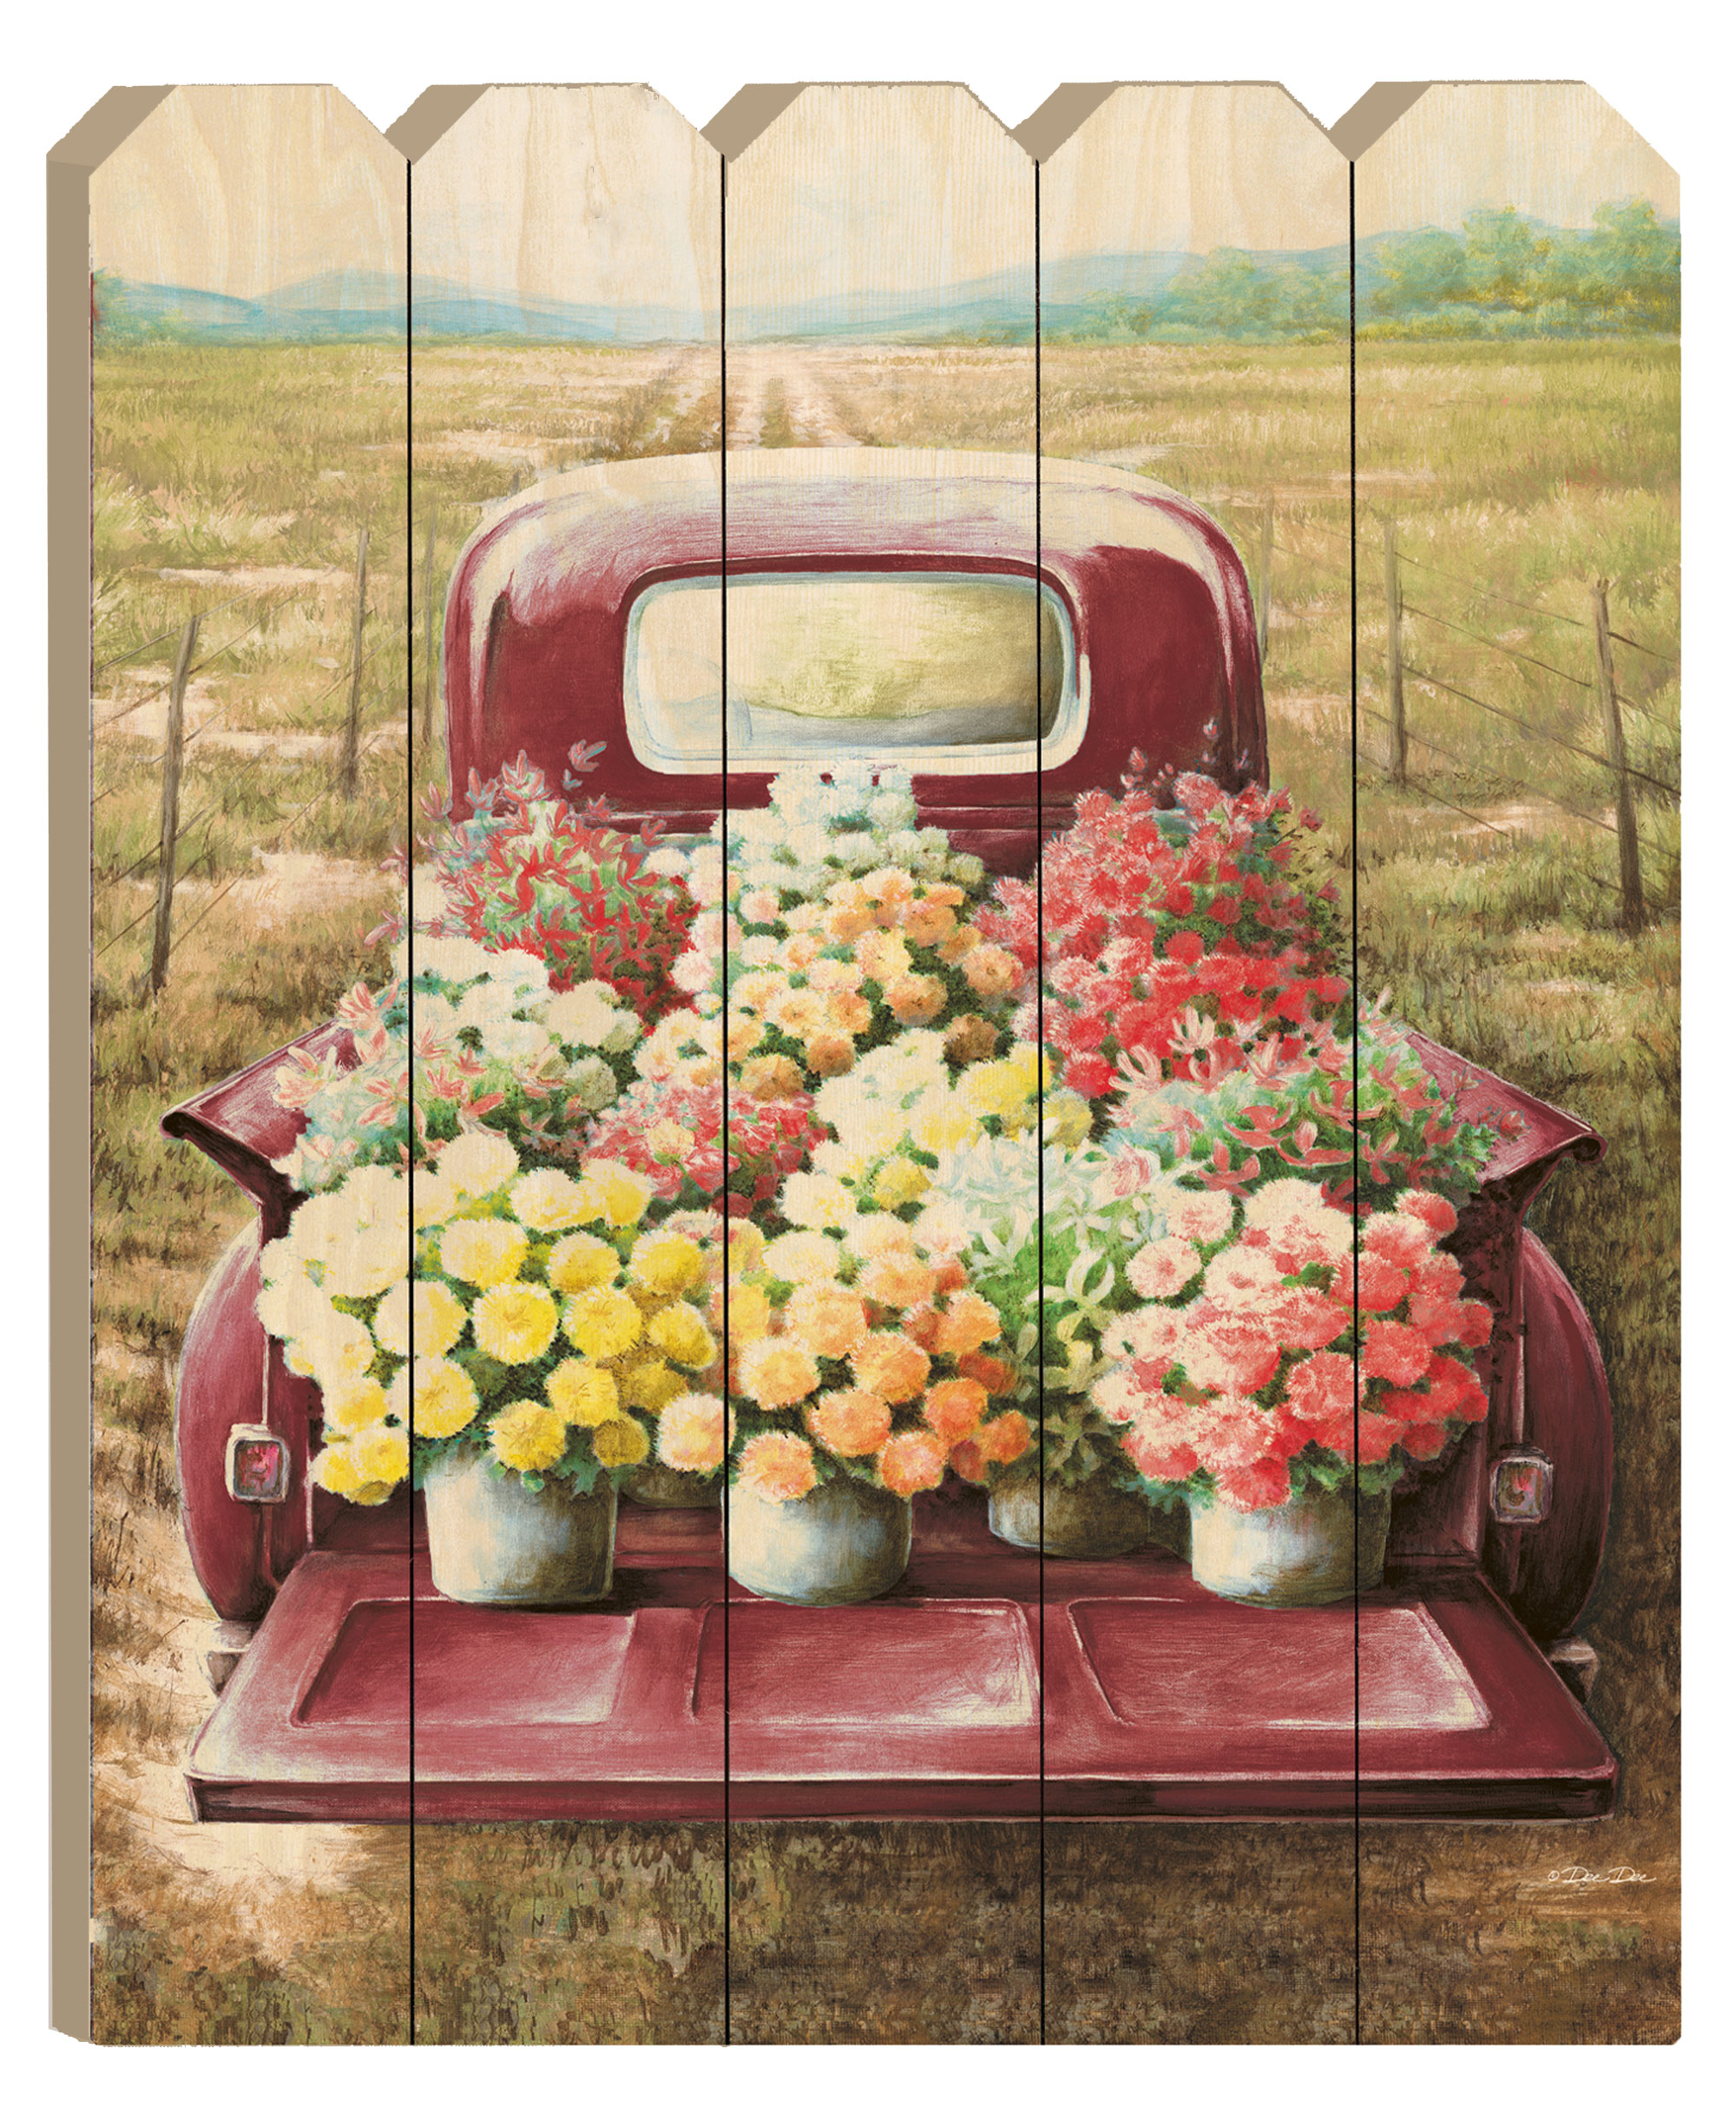 "Flowers For Sale" By Artisan Dee Dee, Printed on Wooden Picket Fence Wall Art